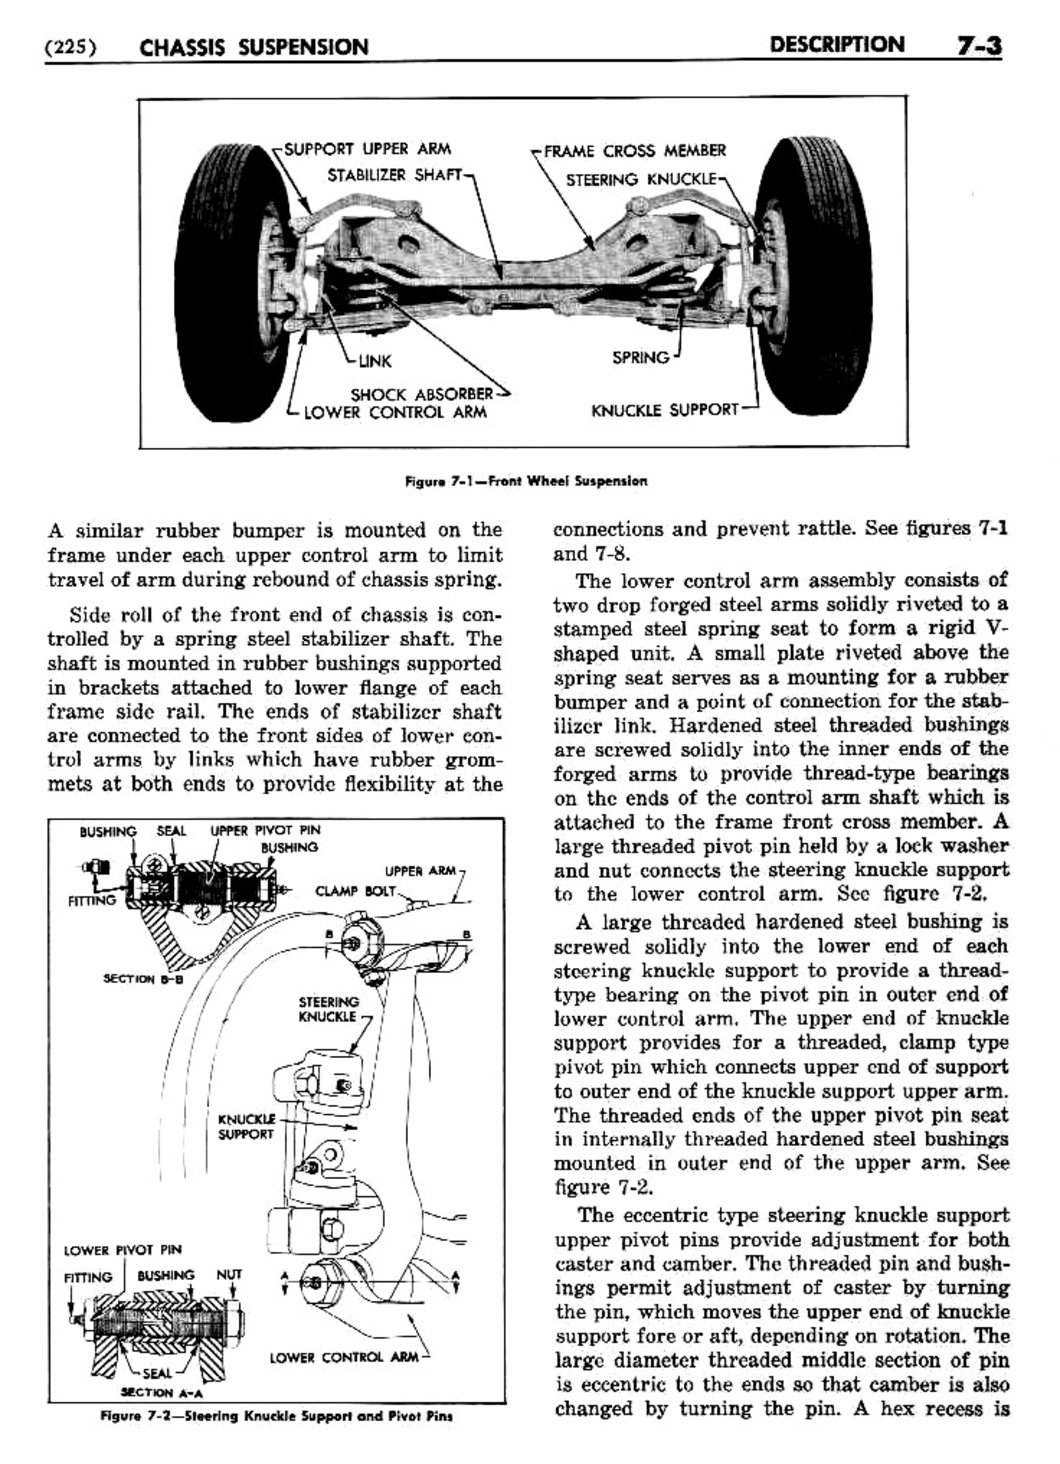 n_08 1955 Buick Shop Manual - Chassis Suspension-003-003.jpg